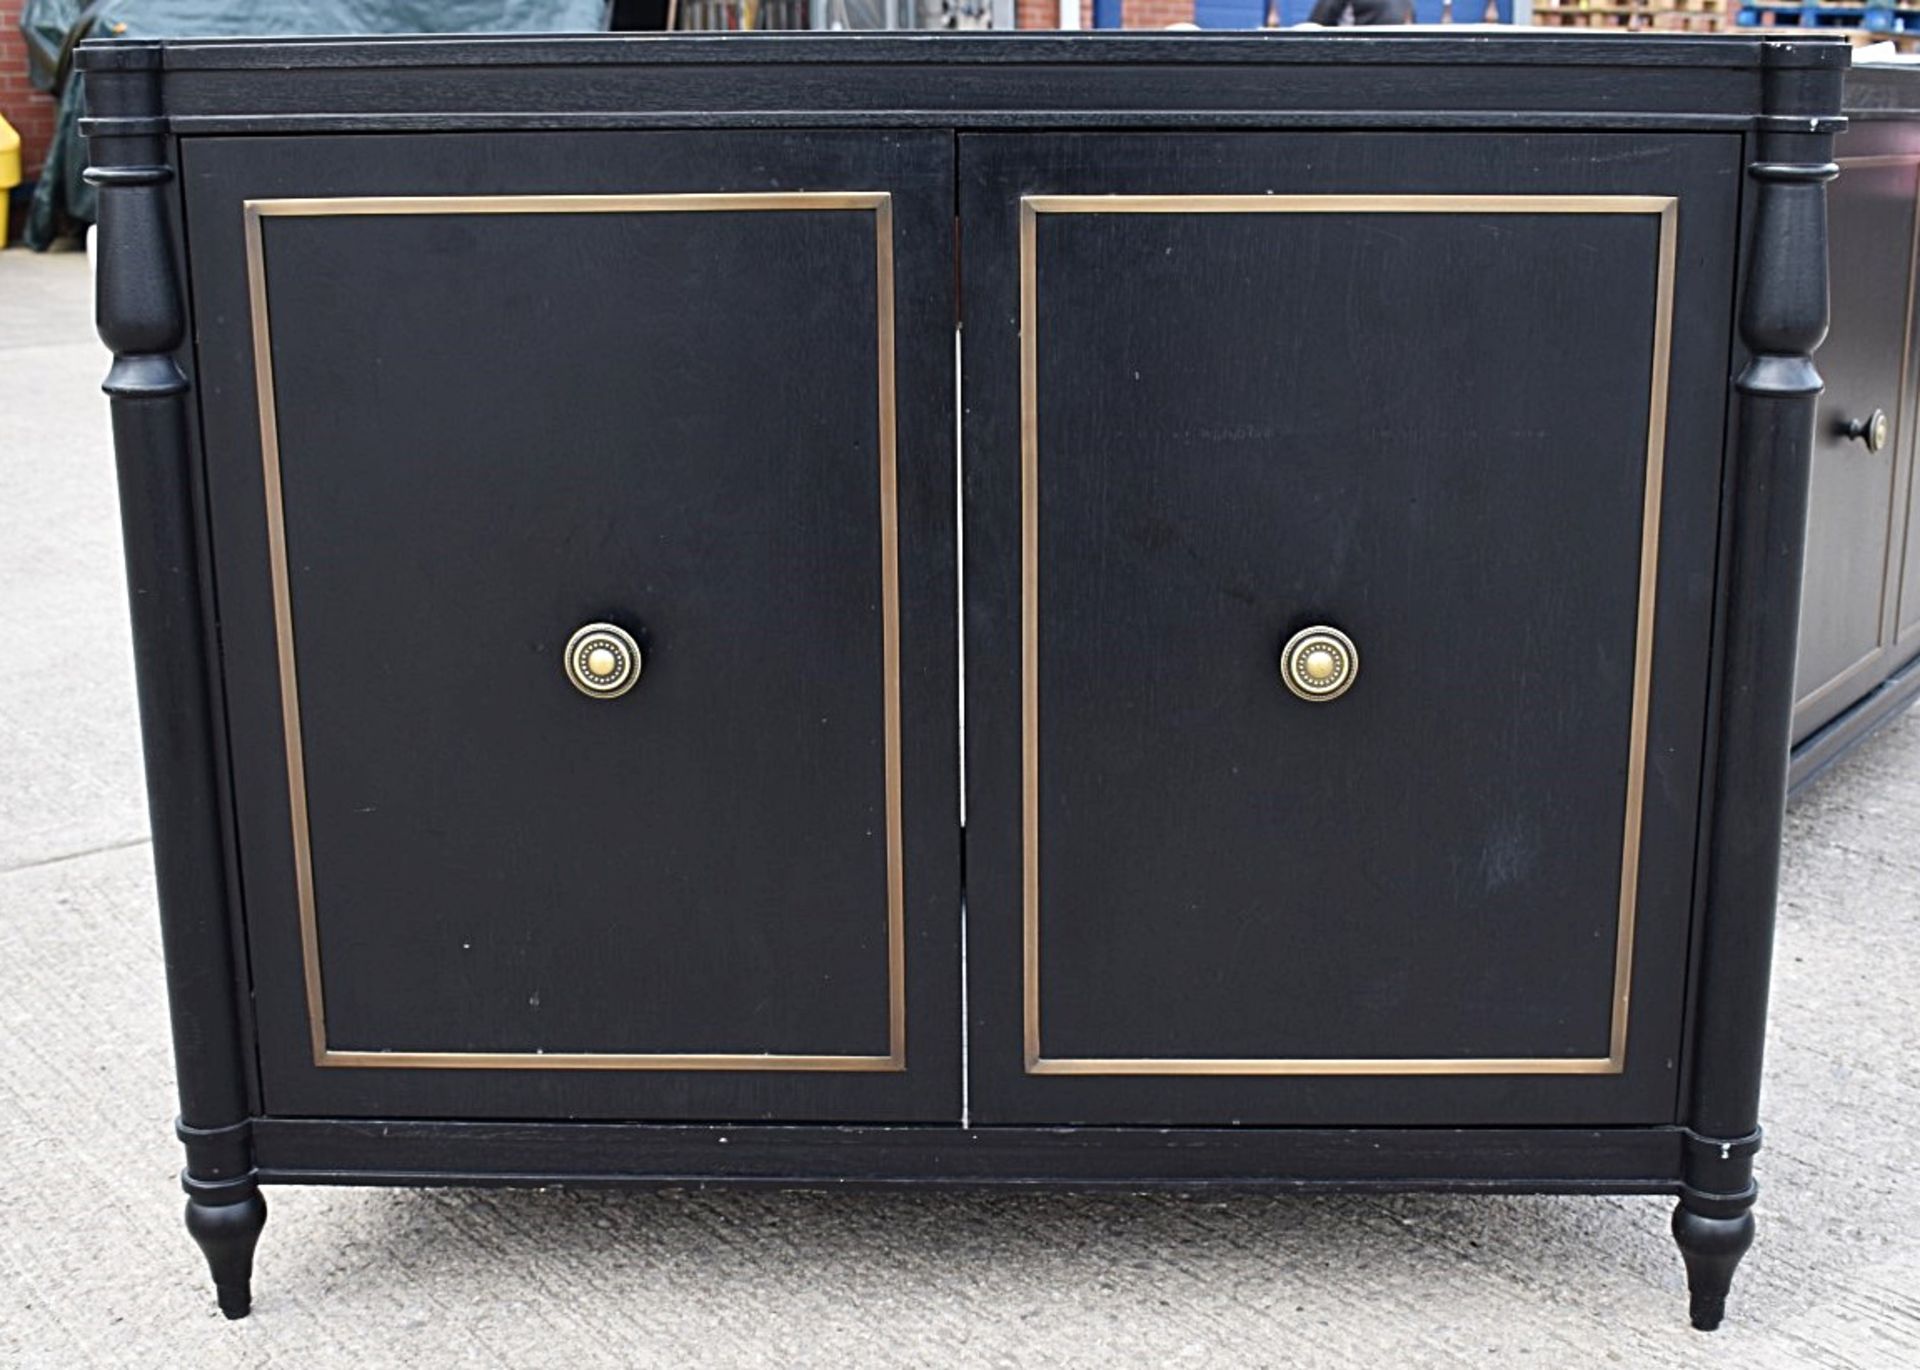 1 x Opulent 2-Door French Period-Style Handcrafted Solid Wood Cabinet in Black, with Brass Inlaid - Image 3 of 10